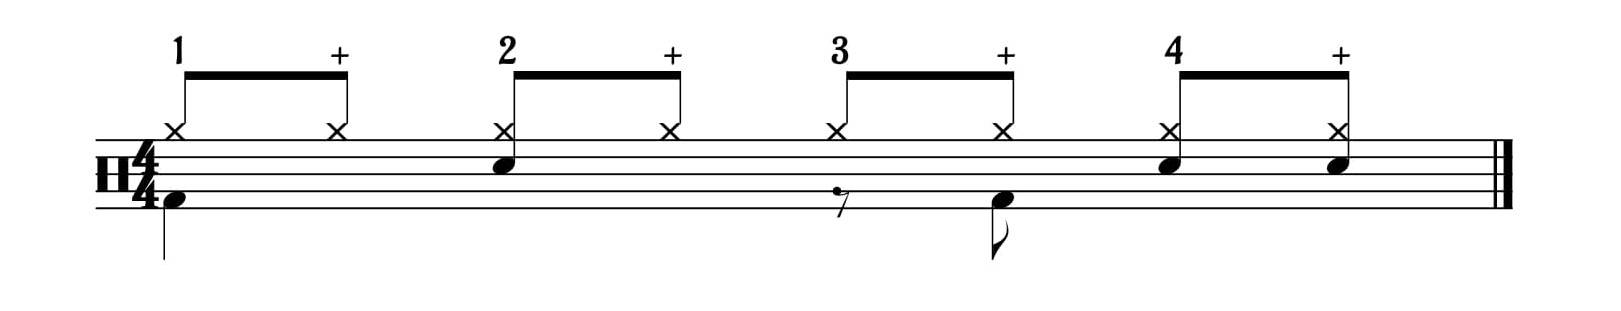 isolating the groove in drum sheet music